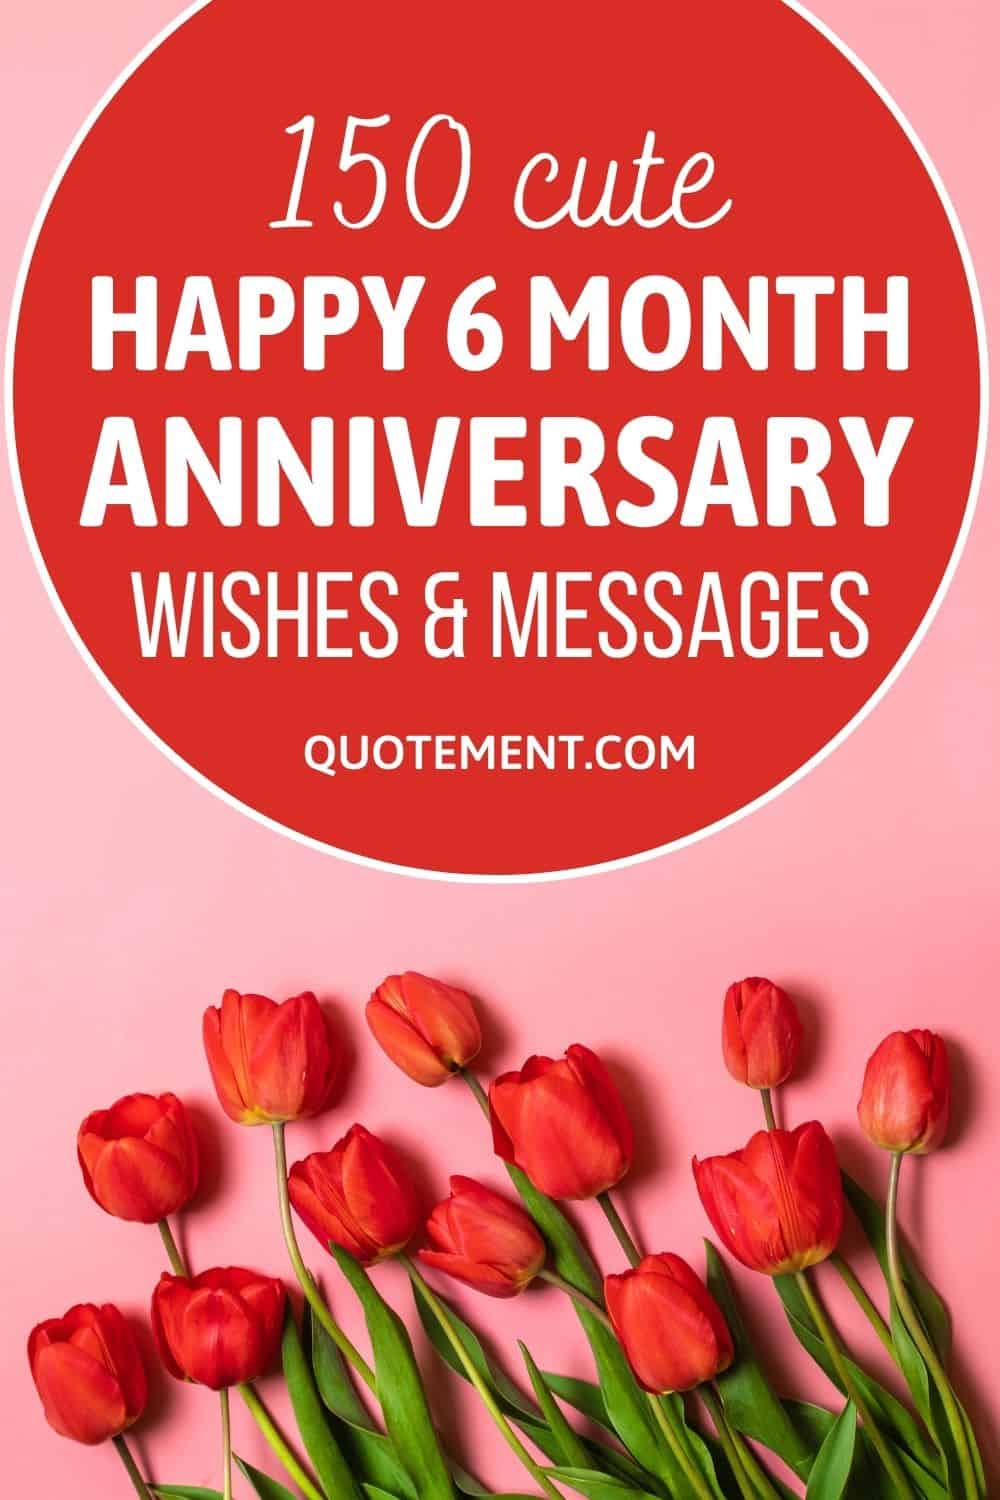 150 Cute Happy 6 Month Anniversary Wishes & Messages pinterest